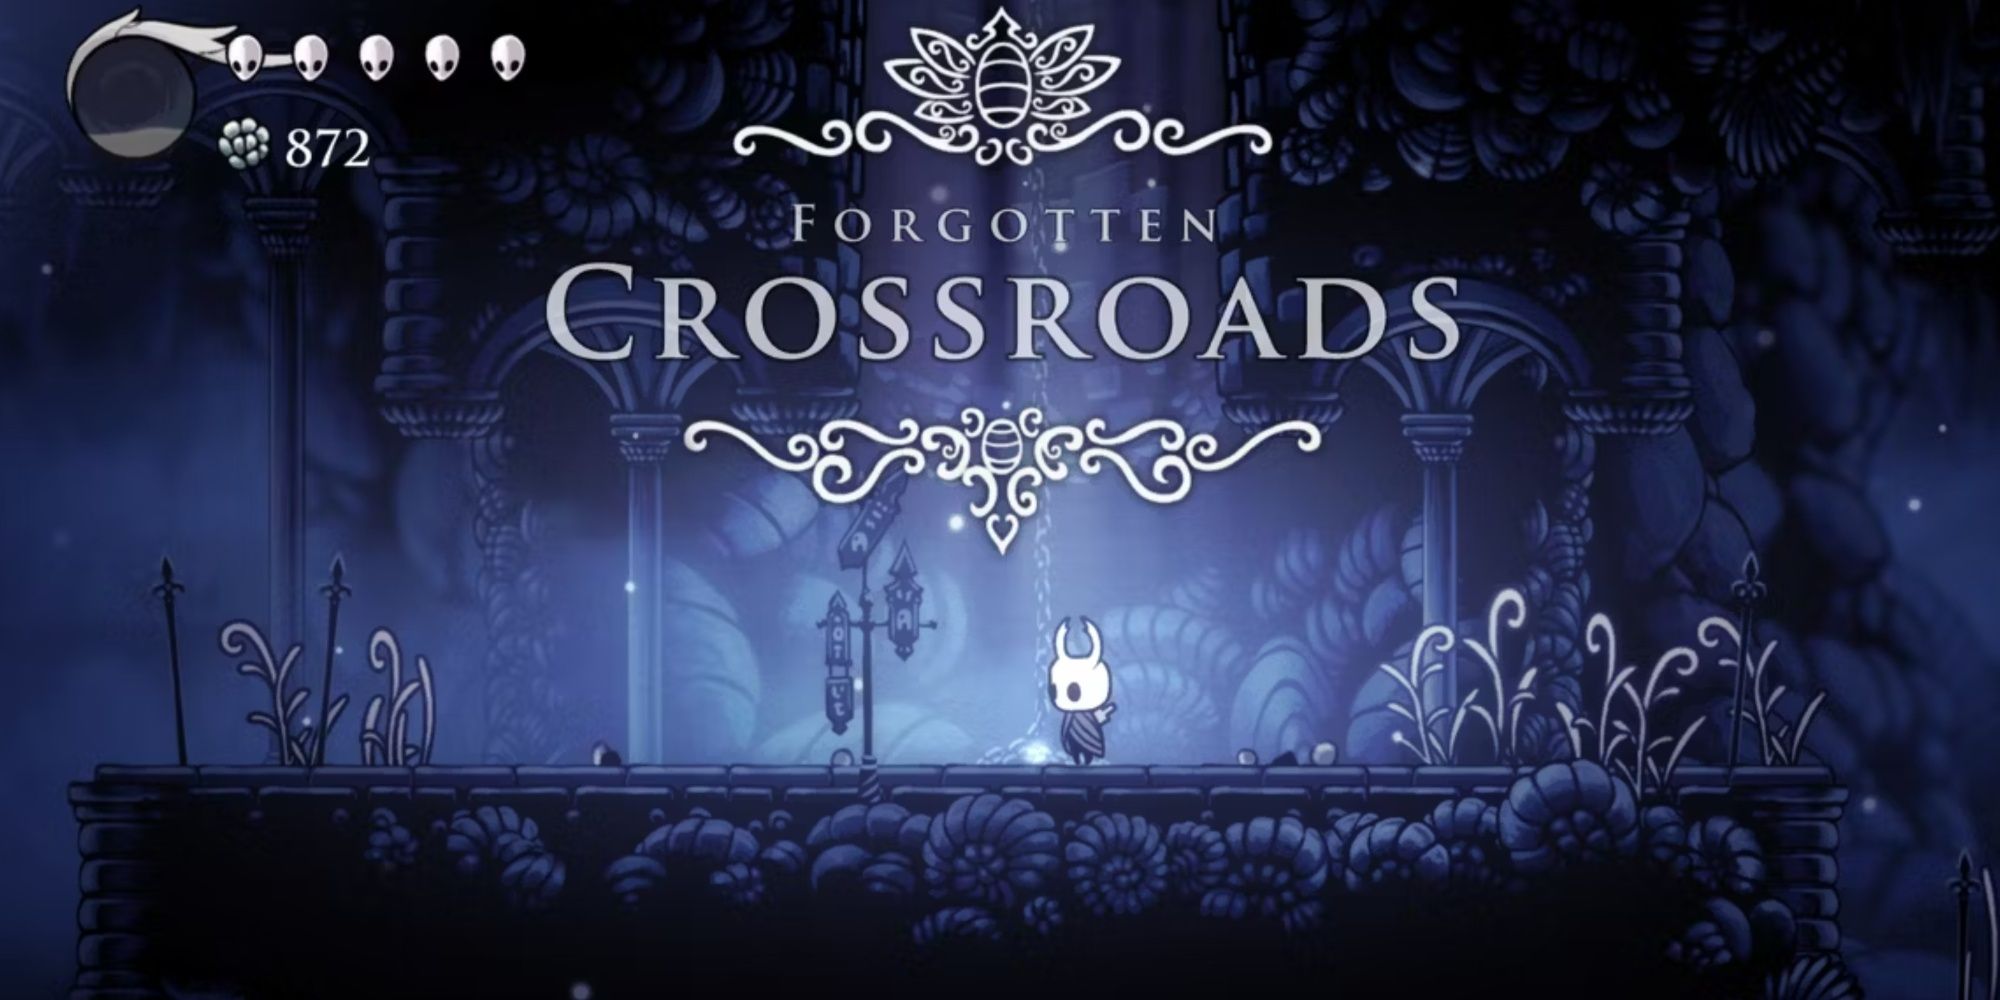 The Knight in the Forgotten Crossroads in Hollow Knight